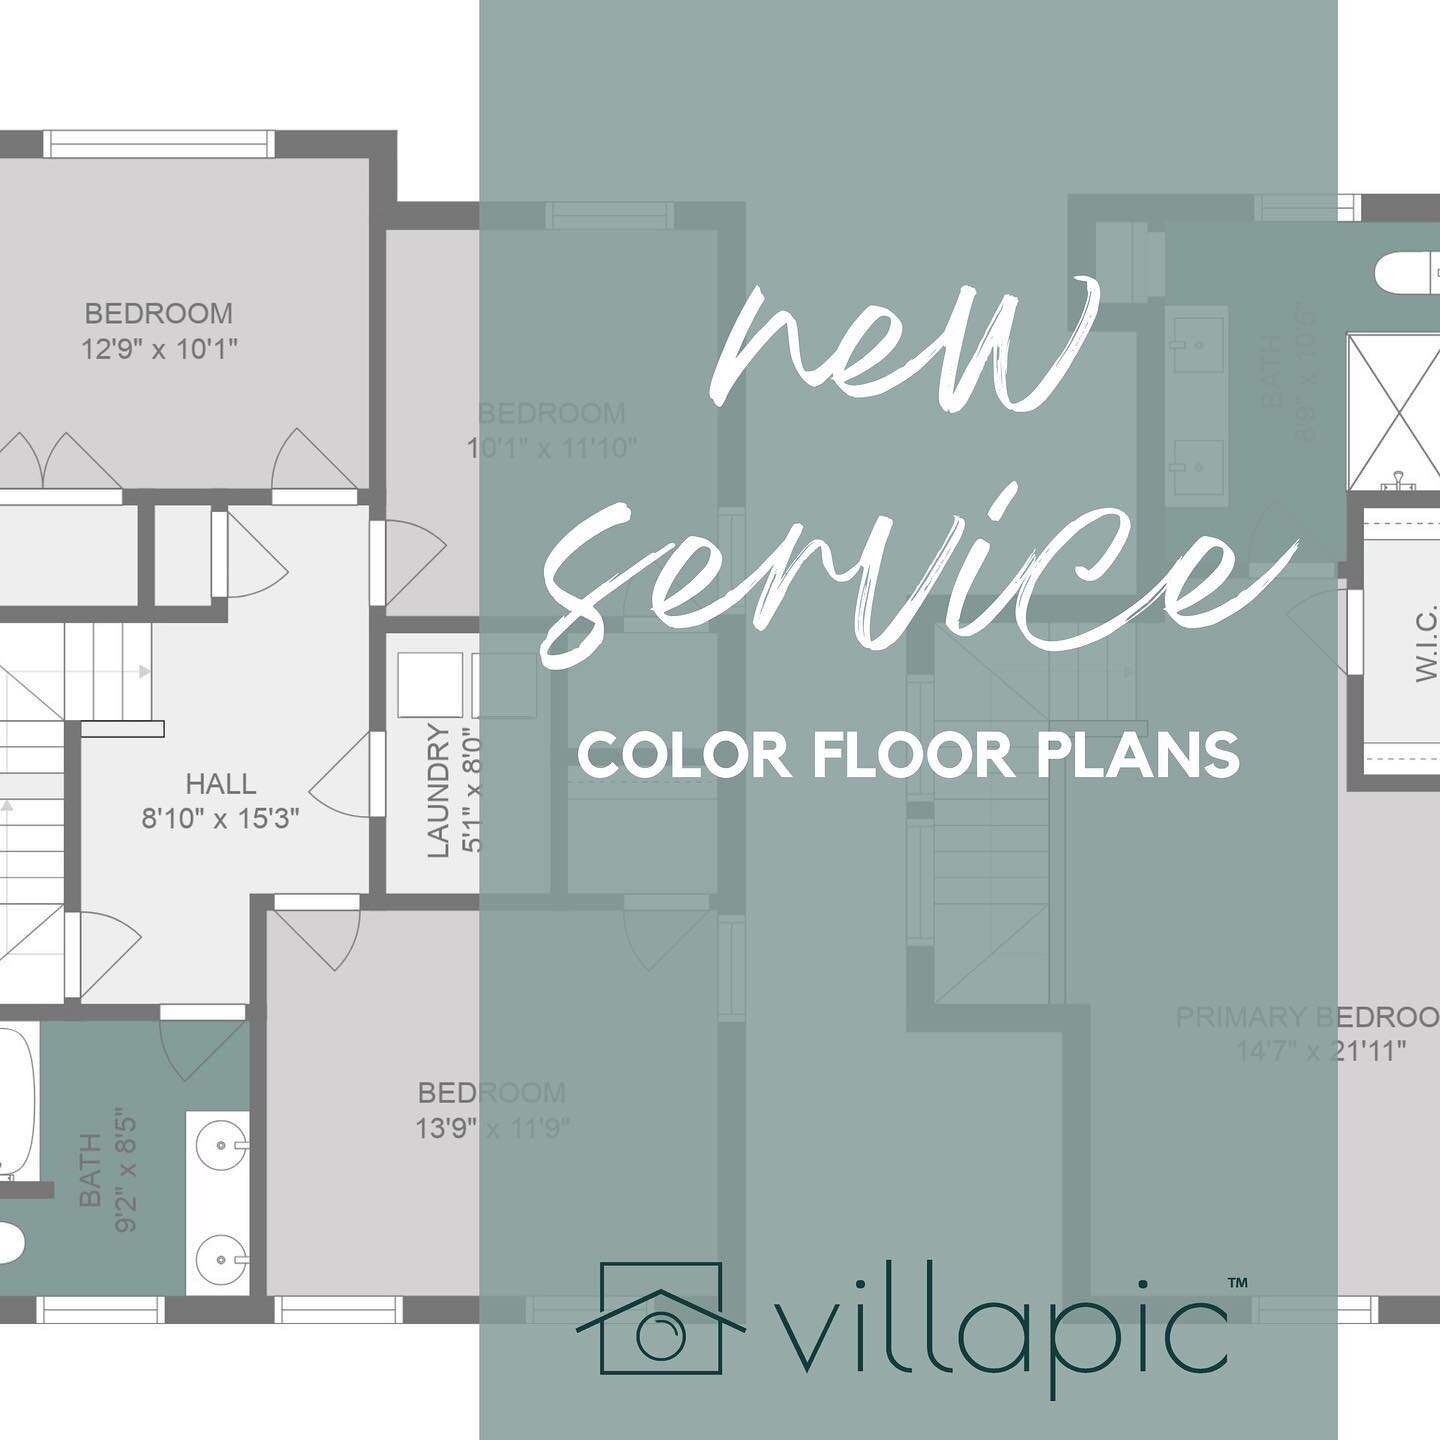 We are SO excited to announce that we are now offering color floor plans as an add-on to your listing photography!!🤗 

Starting at just $50, floor plans are an affordable and impactful marketing tool for your business.

Here are a few reasons why yo